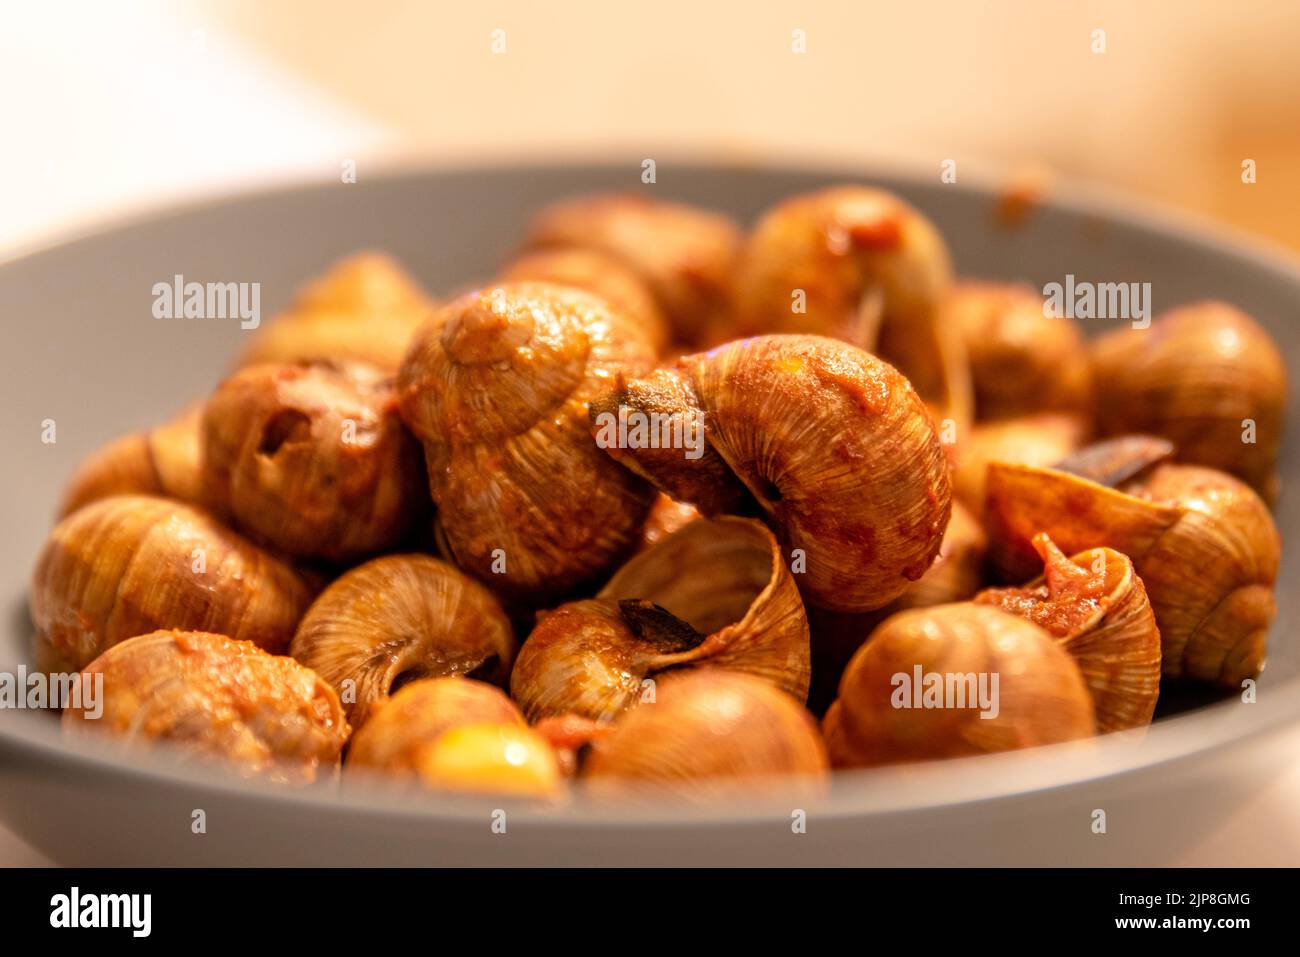 Forest snails cooked with tomato sauce. Delicious poor dish, typical of southern Europe, with Escargot (Helix Aspersa) prepared with tomato sauce Stock Photo